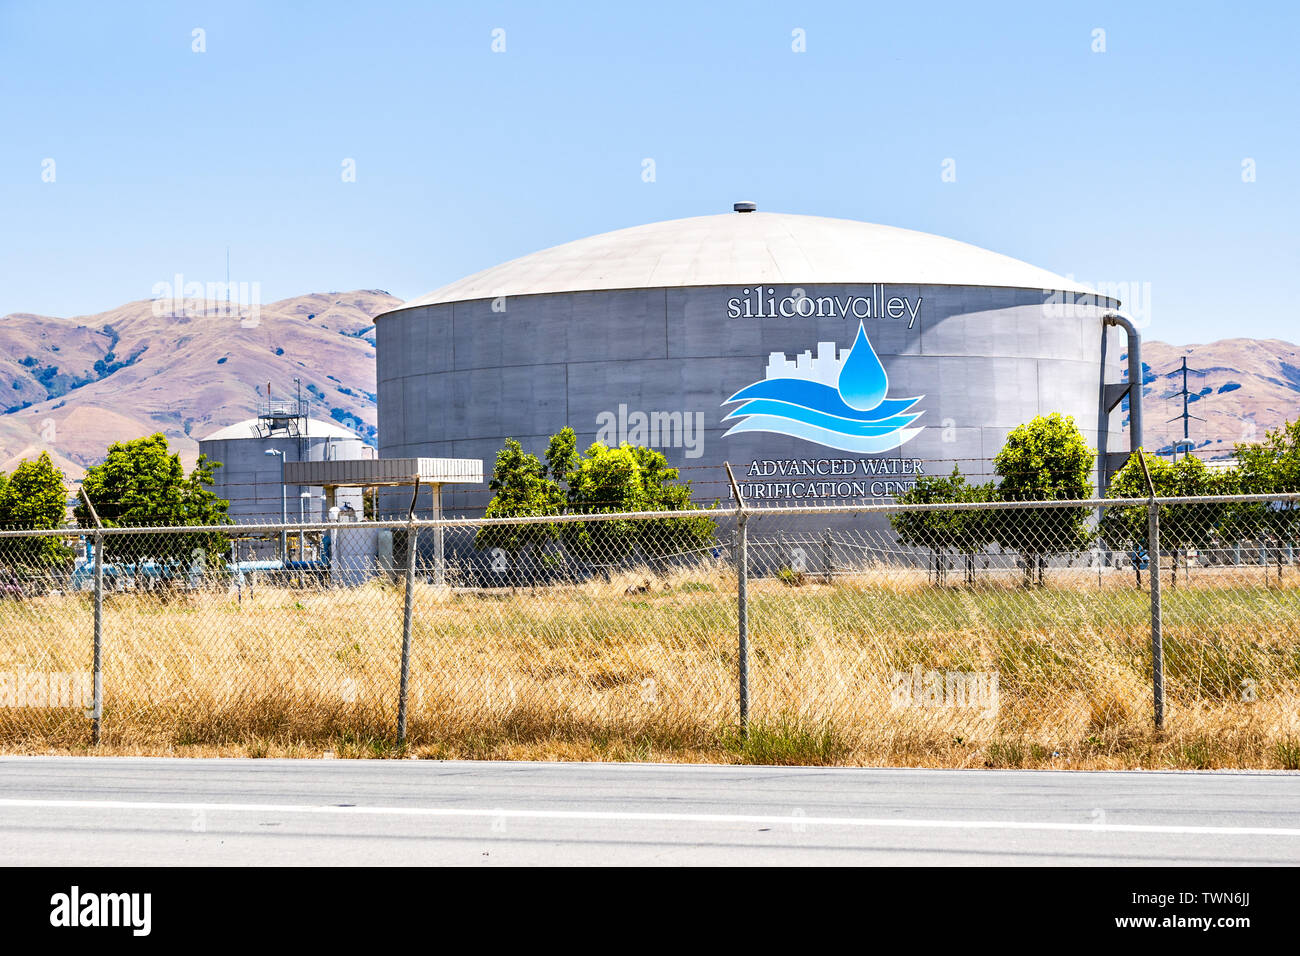 June 20, 2019 San Jose / CA / USA - Silicon Valley Advanced Water Purification Center located in South San Francisco bay area; part of the Santa Clara Stock Photo